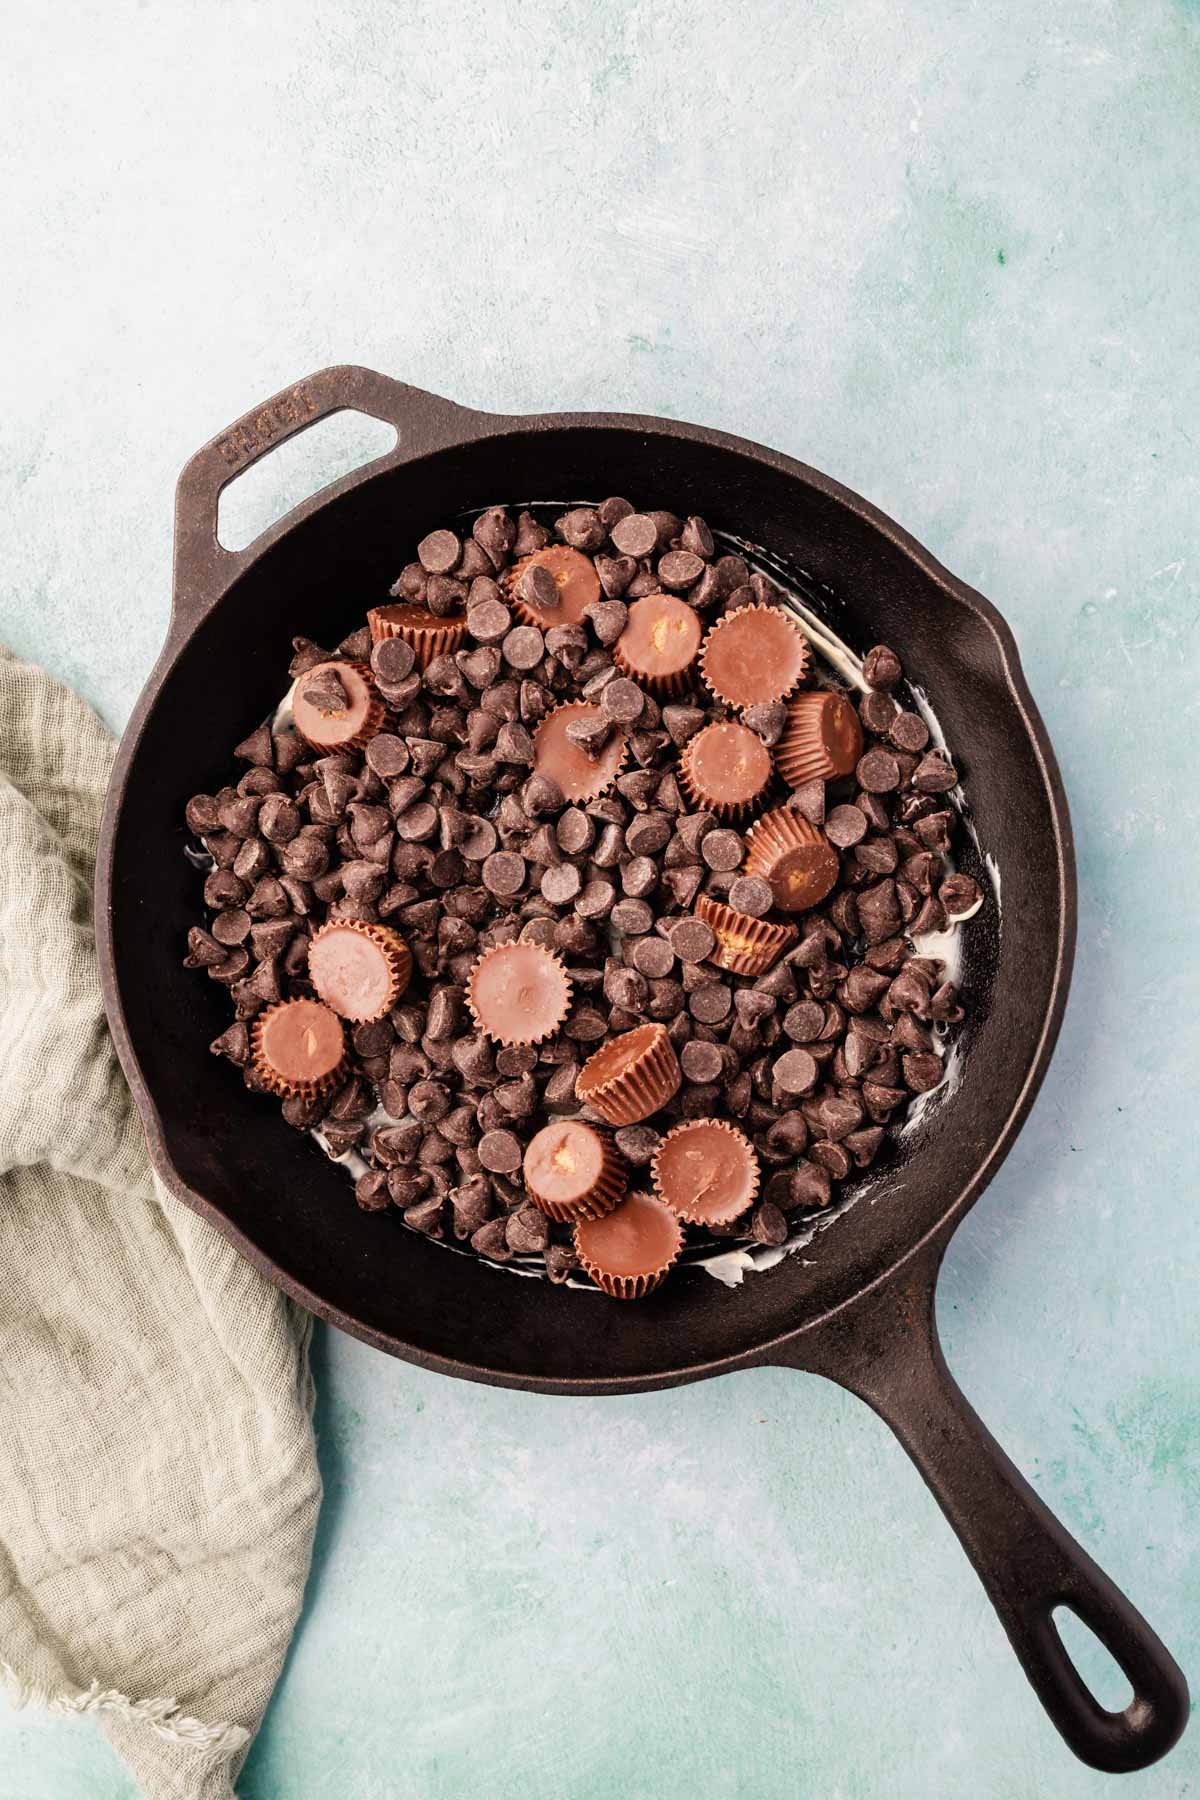 Chocolate chips and peanut butter cups layered in a cast iron skillet on a blue background.